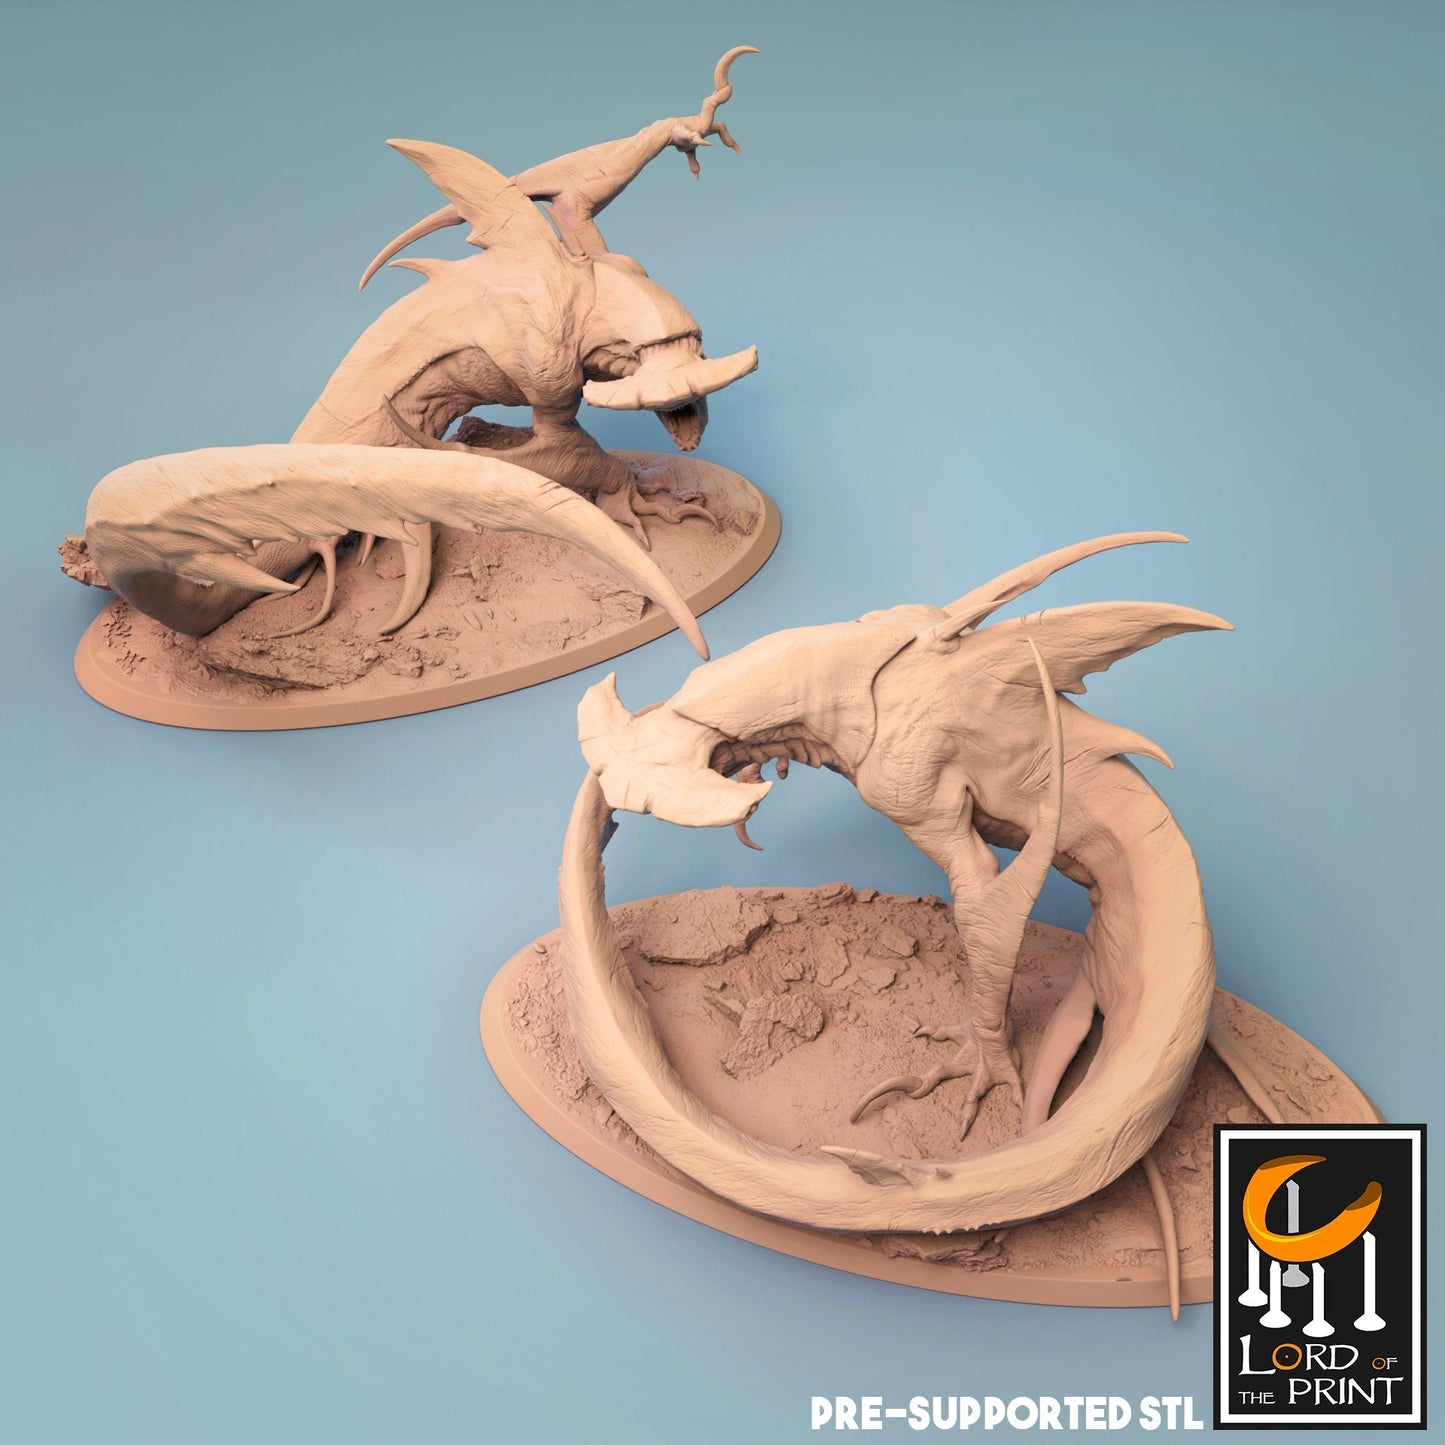 Landcrawlers by Lord of the Print